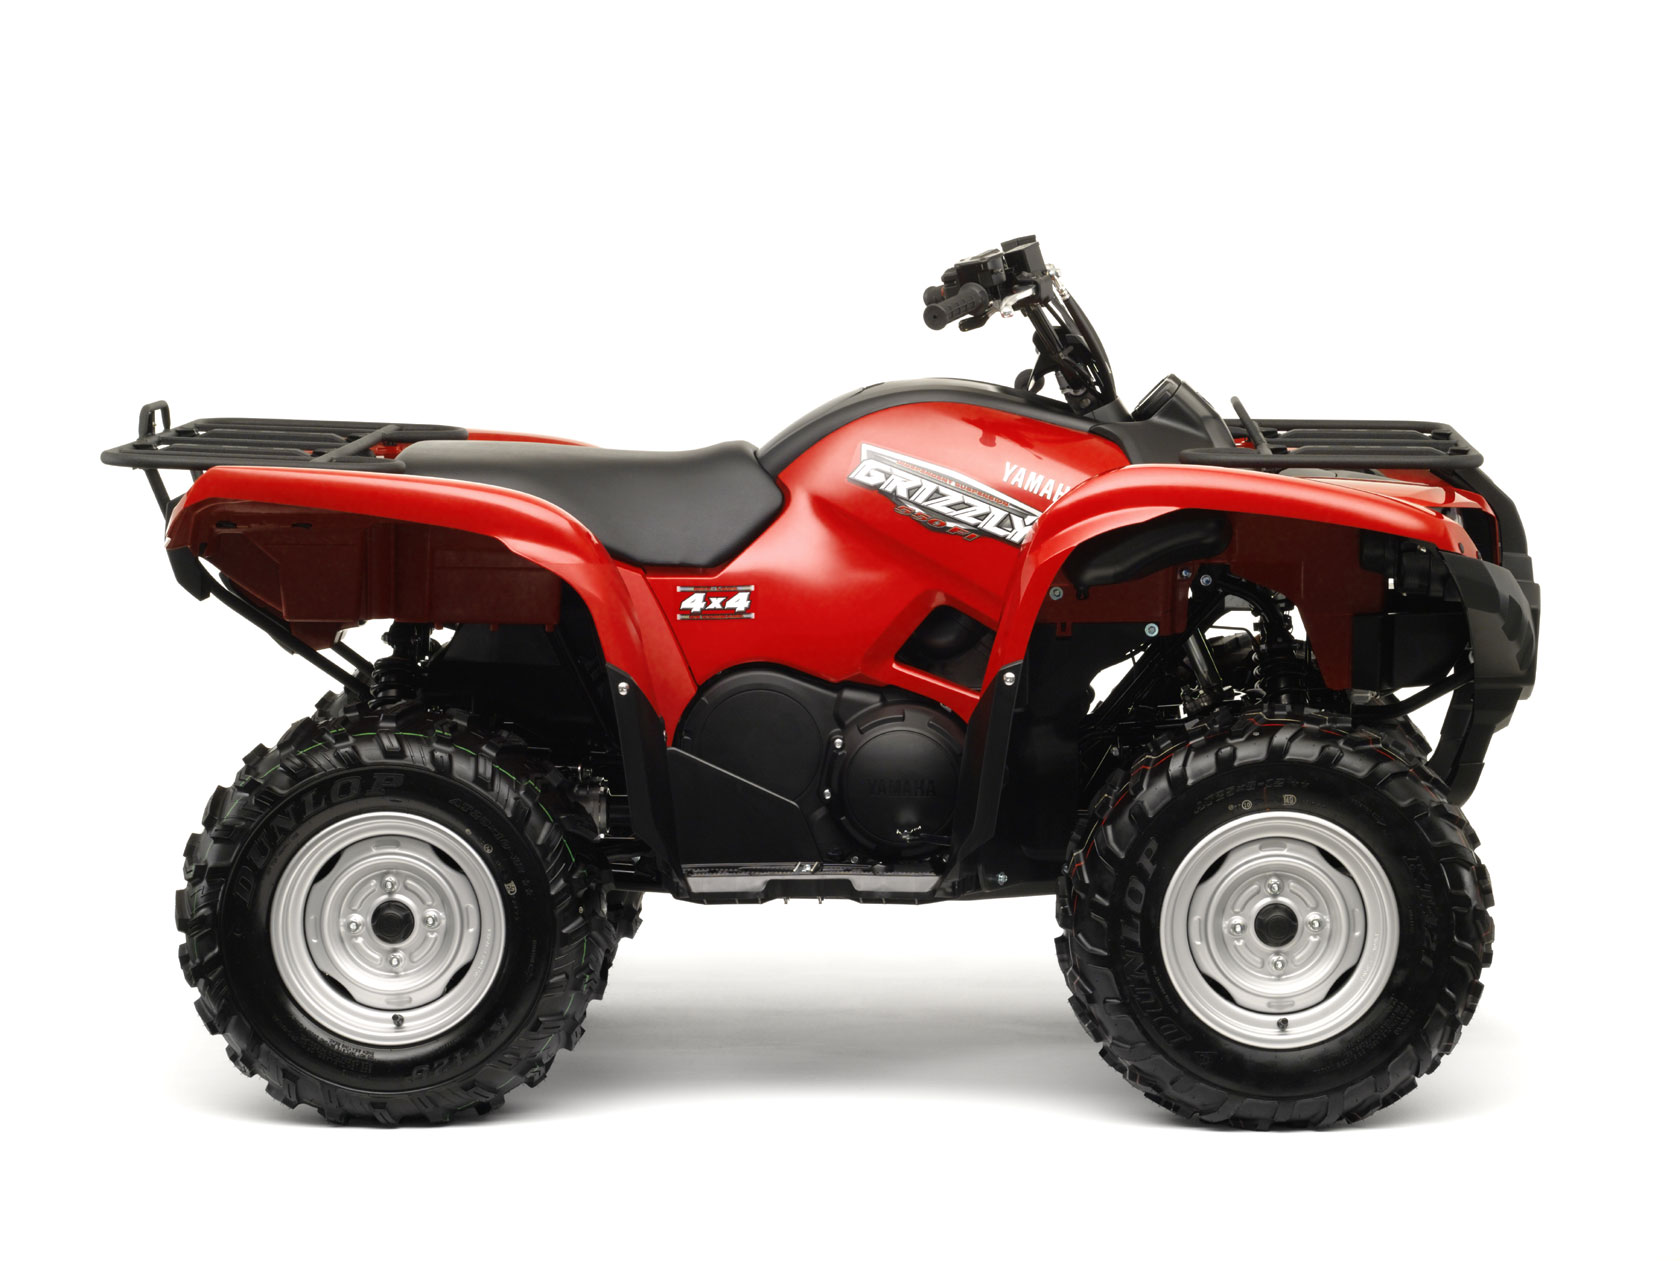 2014 grizzly 550 service manual